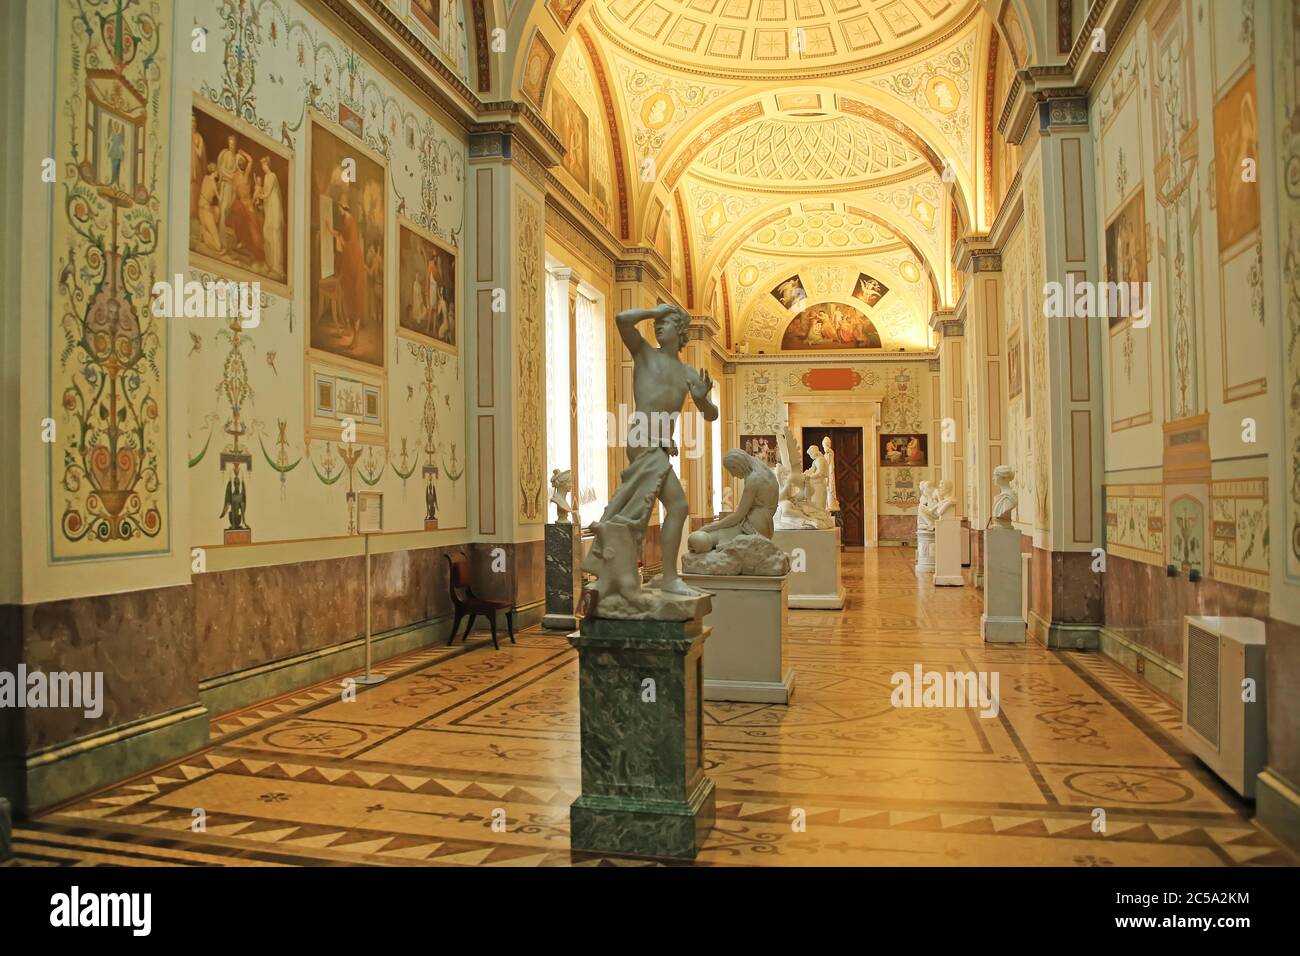 Gallery of the History of Ancient Painting, State Hermitage Museum, St Petersburg, Russia. Stock Photo